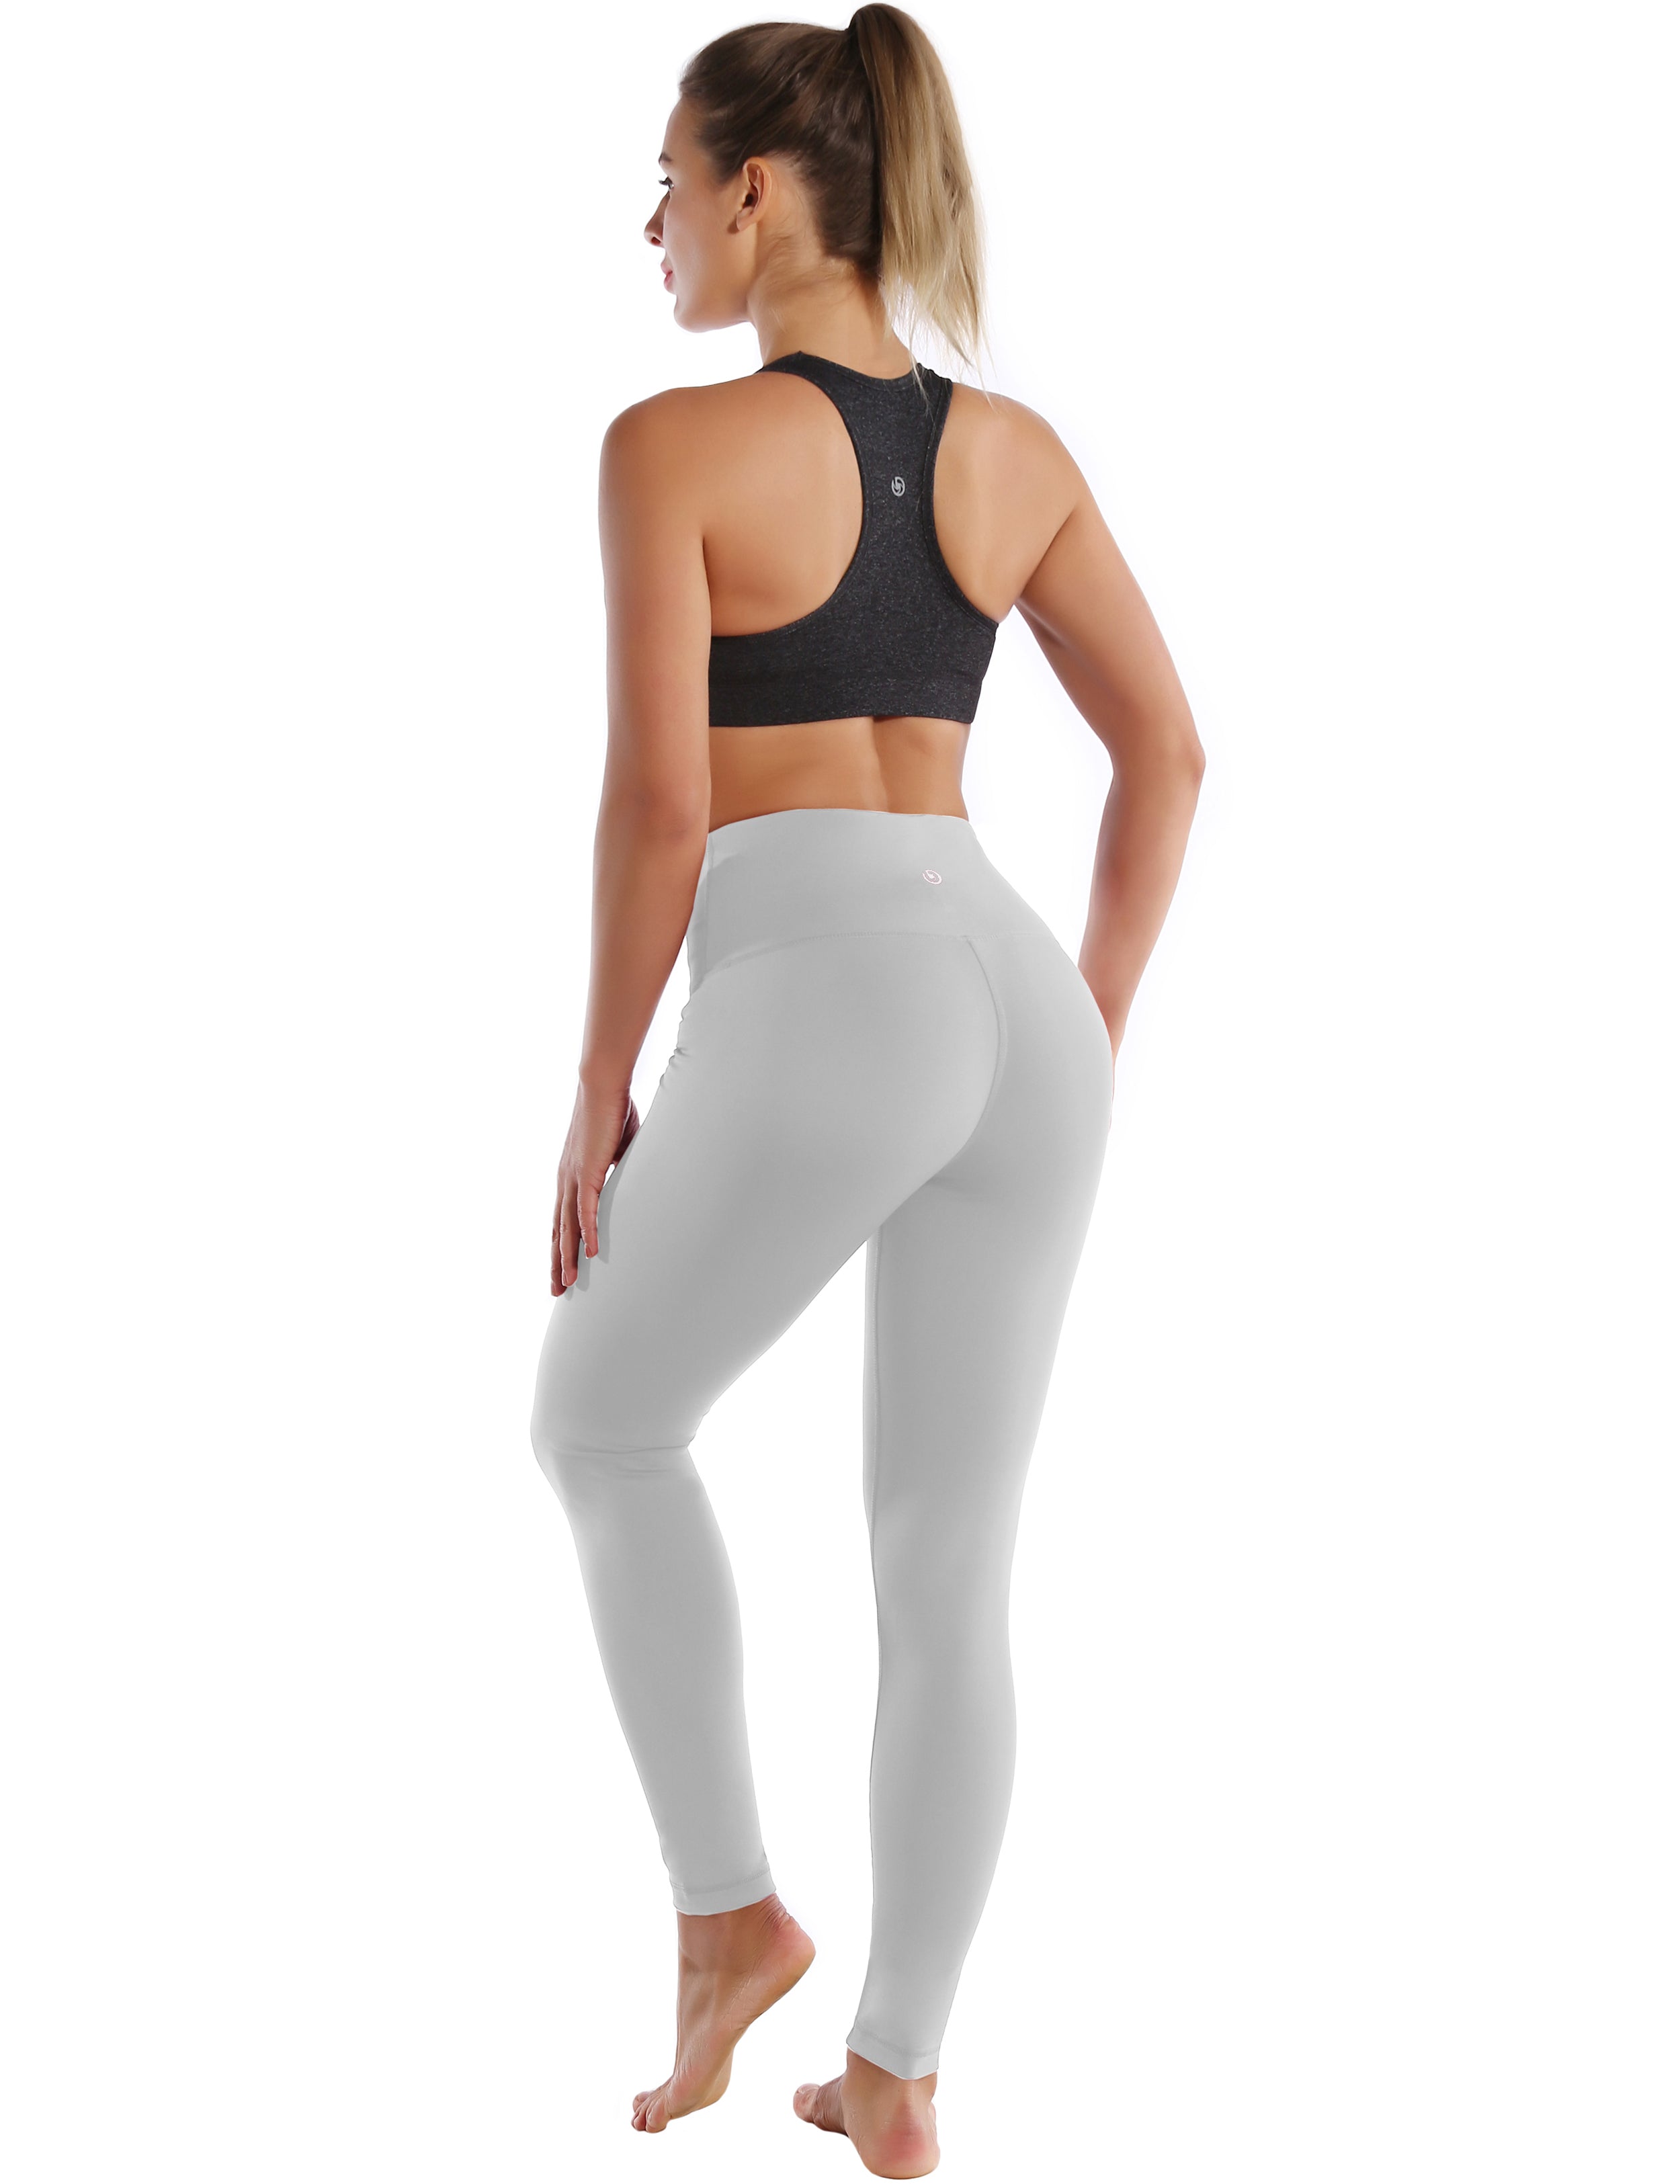 High Waist Pilates Pants lightgray 75%Nylon/25%Spandex Fabric doesn't attract lint easily 4-way stretch No see-through Moisture-wicking Tummy control Inner pocket Four lengths